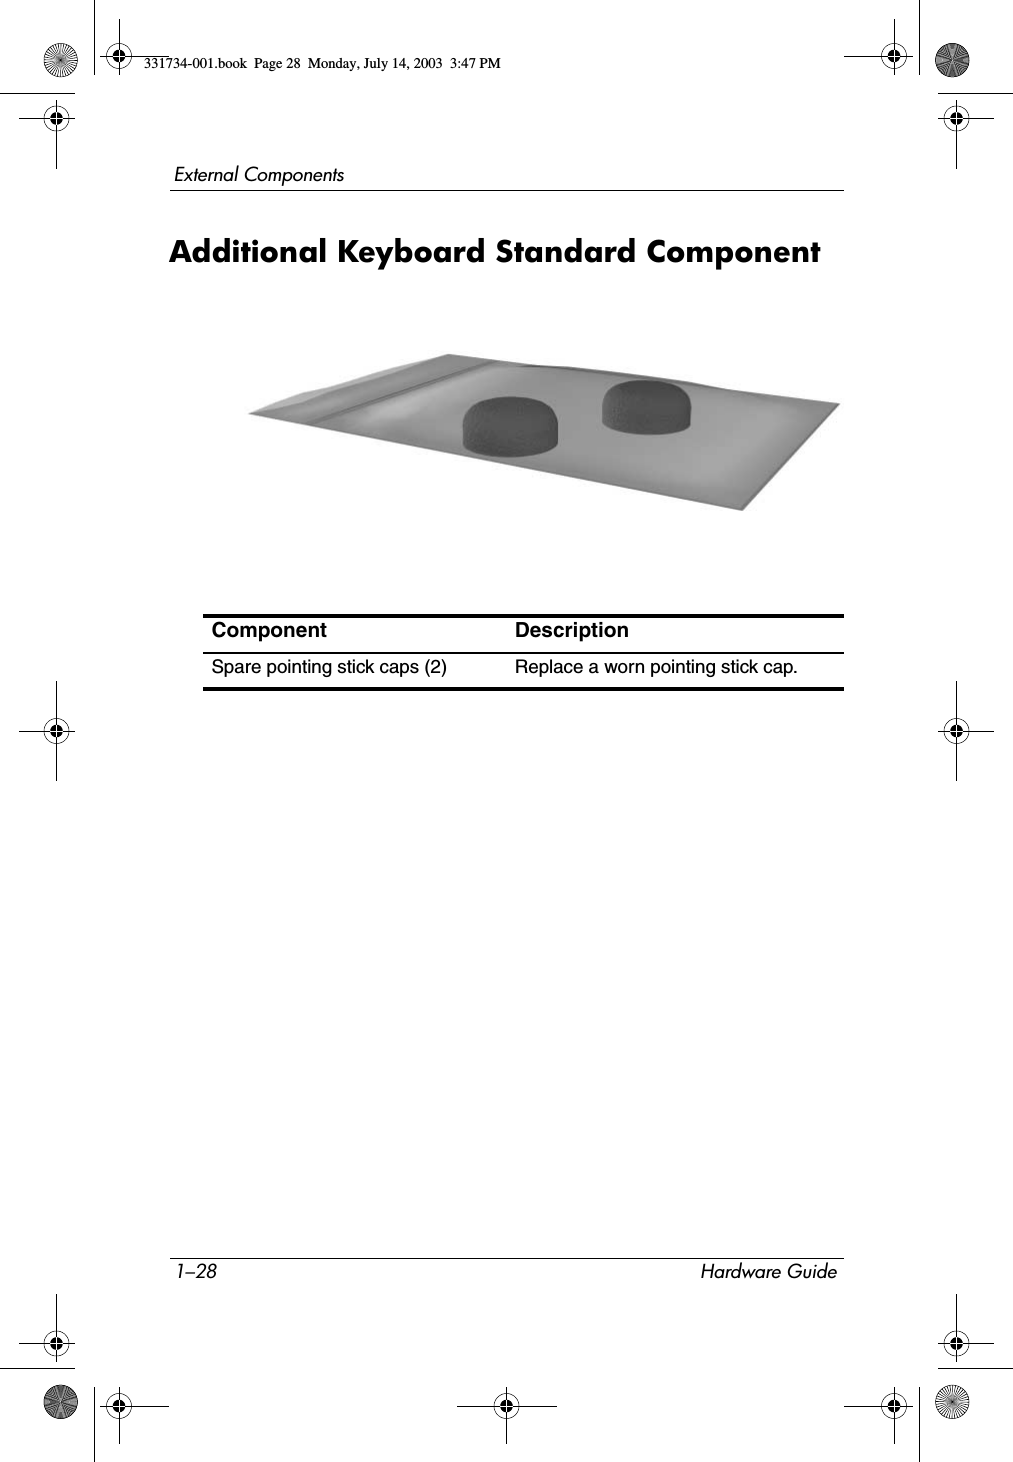 1–28 Hardware GuideExternal ComponentsAdditional Keyboard Standard ComponentComponent DescriptionSpare pointing stick caps (2) Replace a worn pointing stick cap.331734-001.book  Page 28  Monday, July 14, 2003  3:47 PM